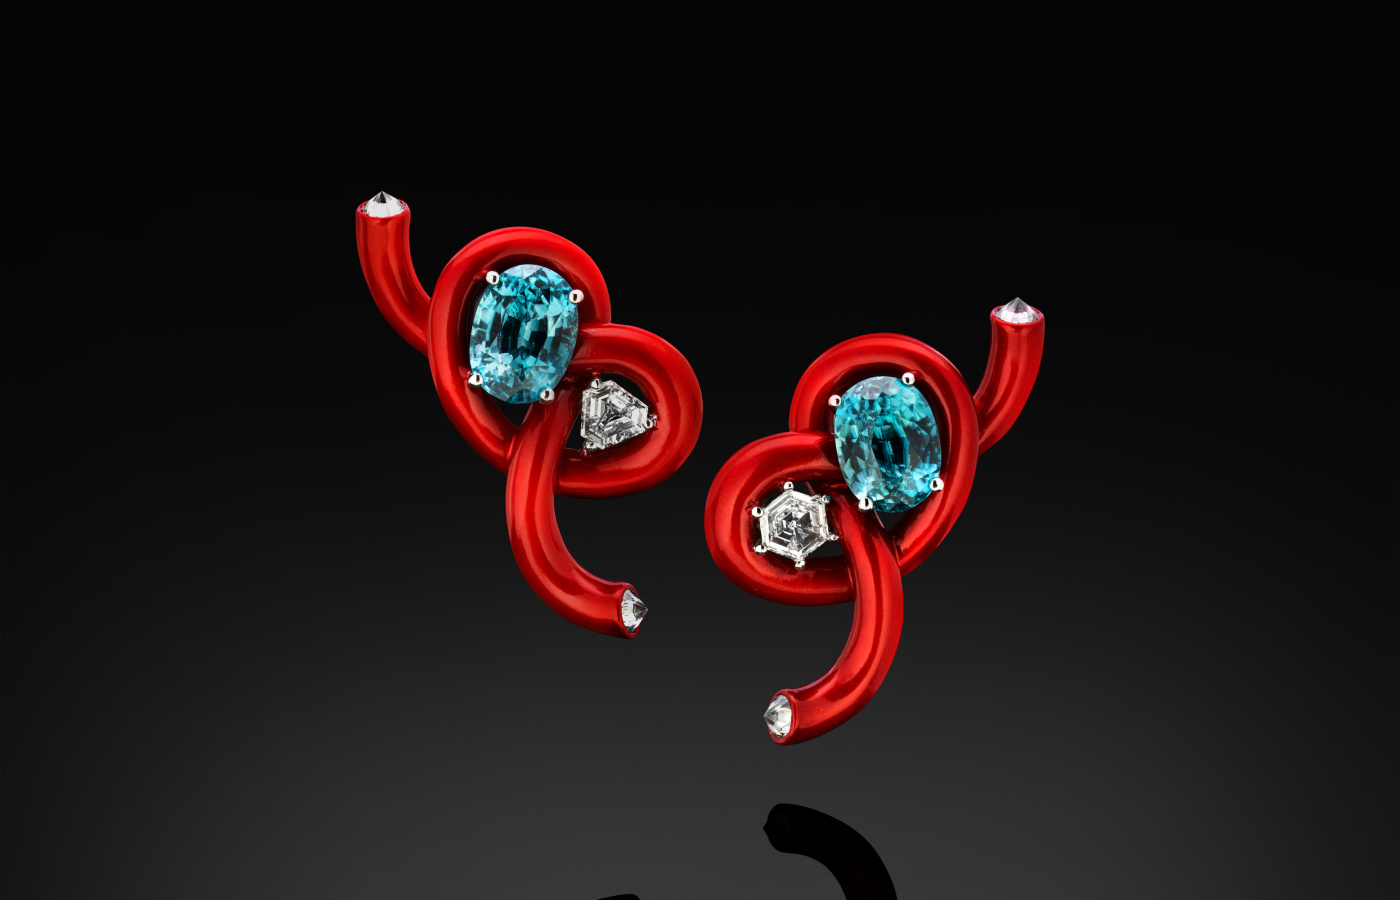 Austy Lee ‘The Red Figure8 Knot’ earrings from The Lock-Knot collection in 18k white gold with blue zircon, red enamel and white diamonds